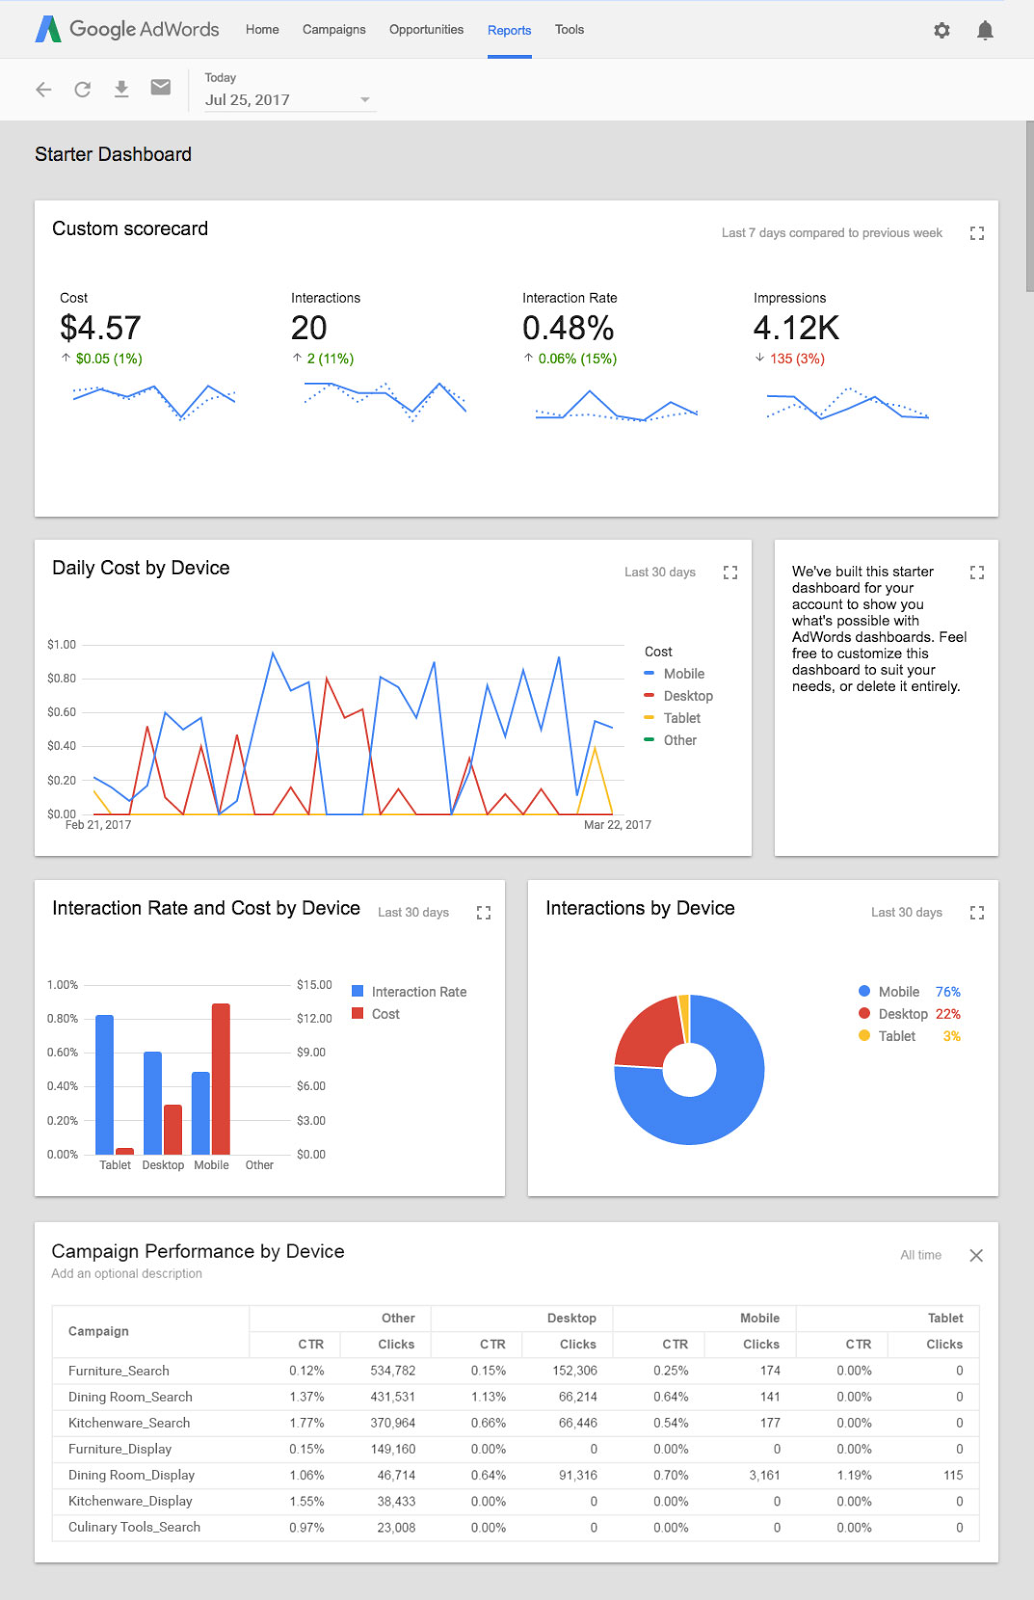 Google AdWords Rolling Out Dashboards For Reporting